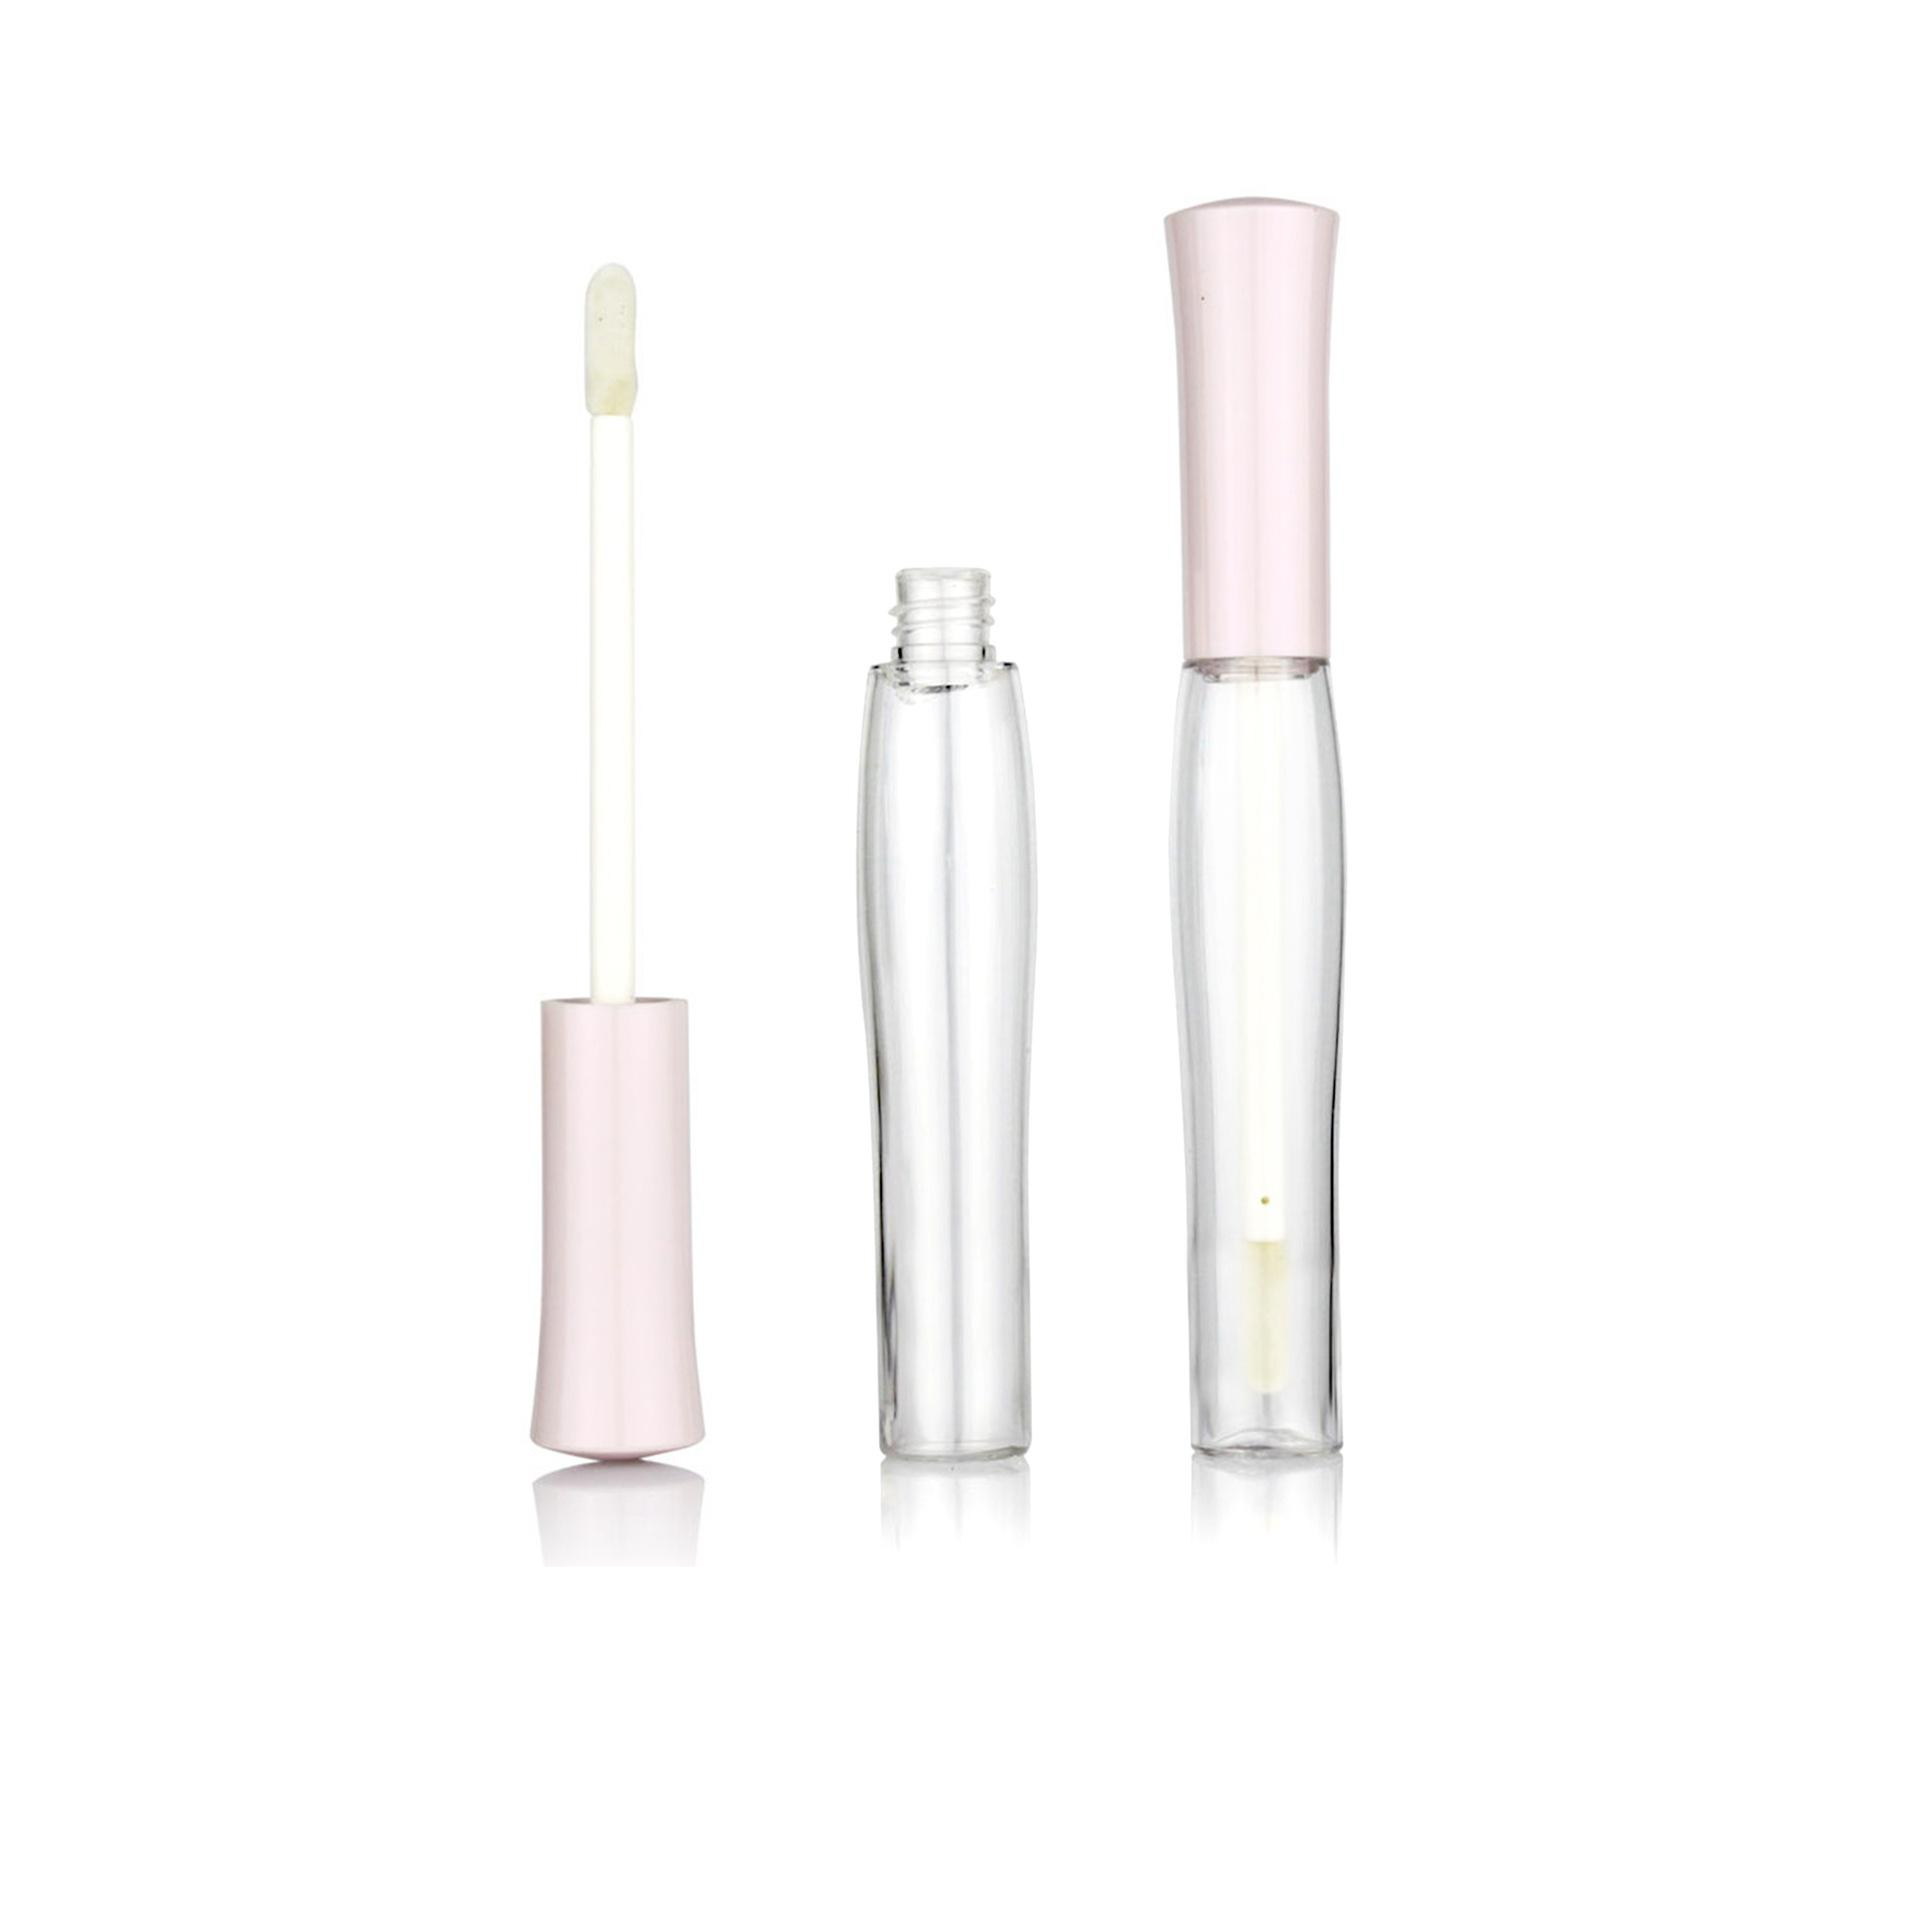 unique vase Lipgloss Tube cute empty pretty Lip Gloss Containers liquid lipstick bottle with pink cap Featured Image